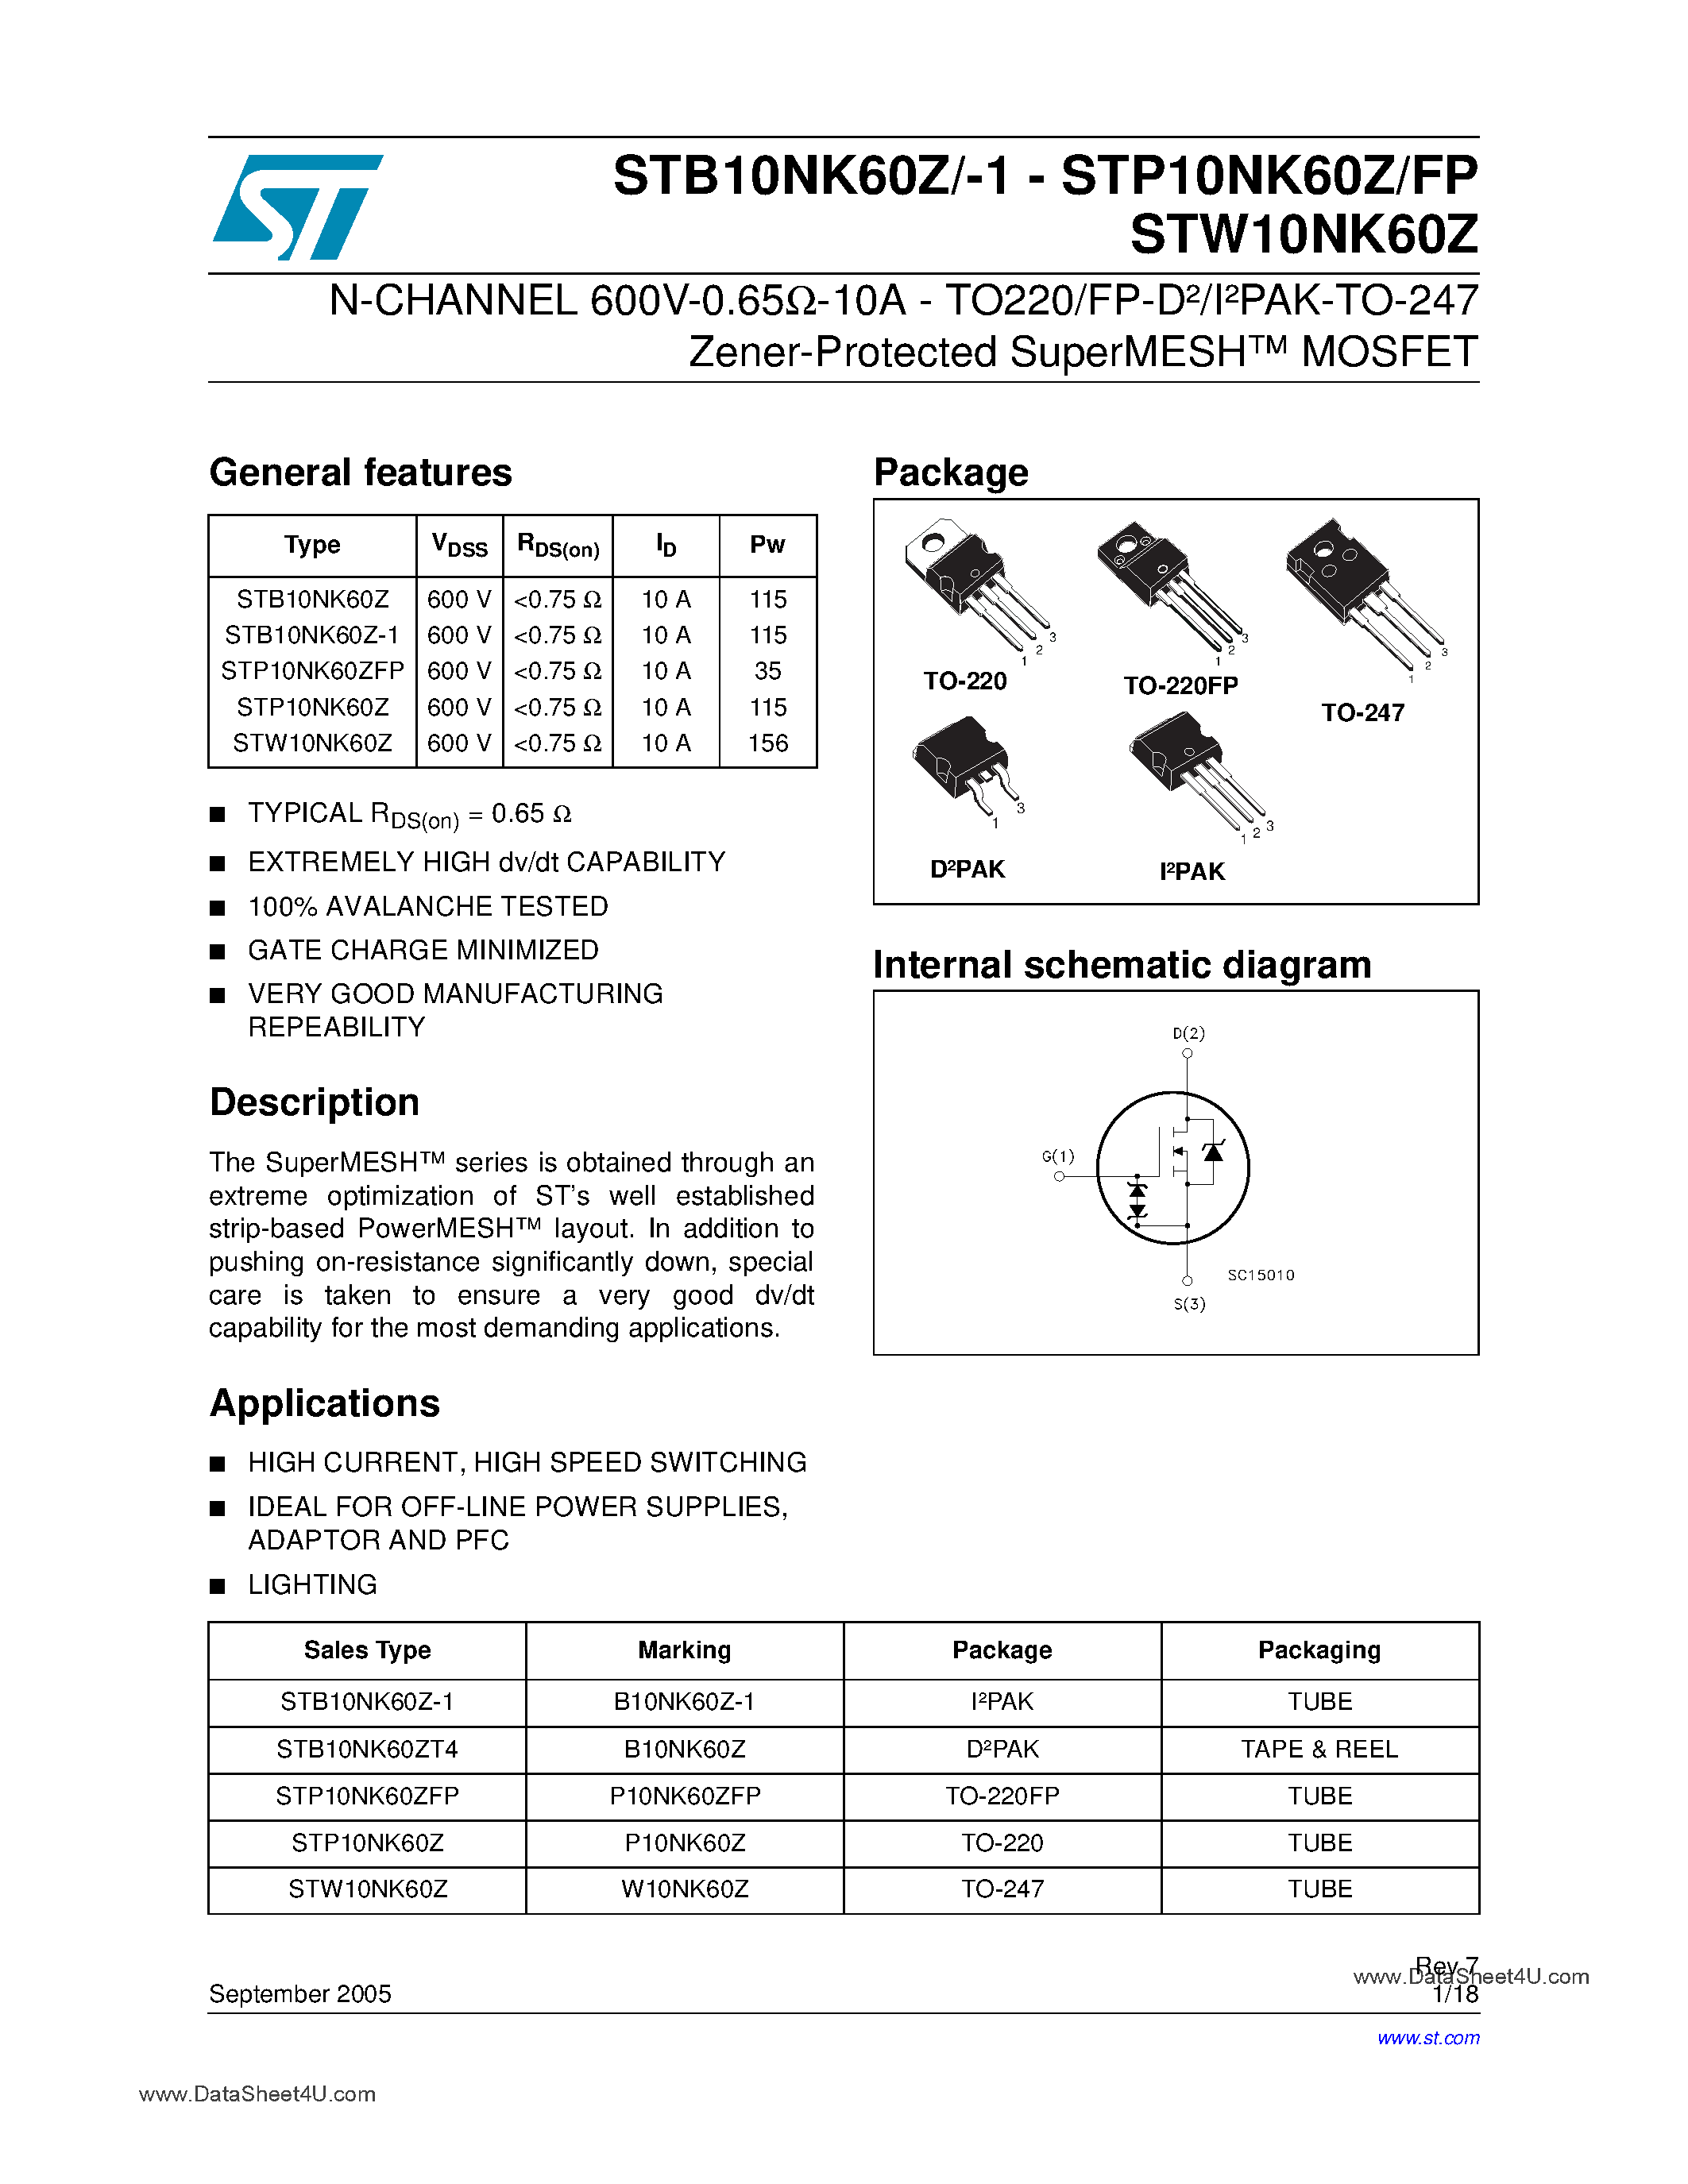 Даташит STP10NK60Z - N-CHANNEL Power MOSFET страница 1